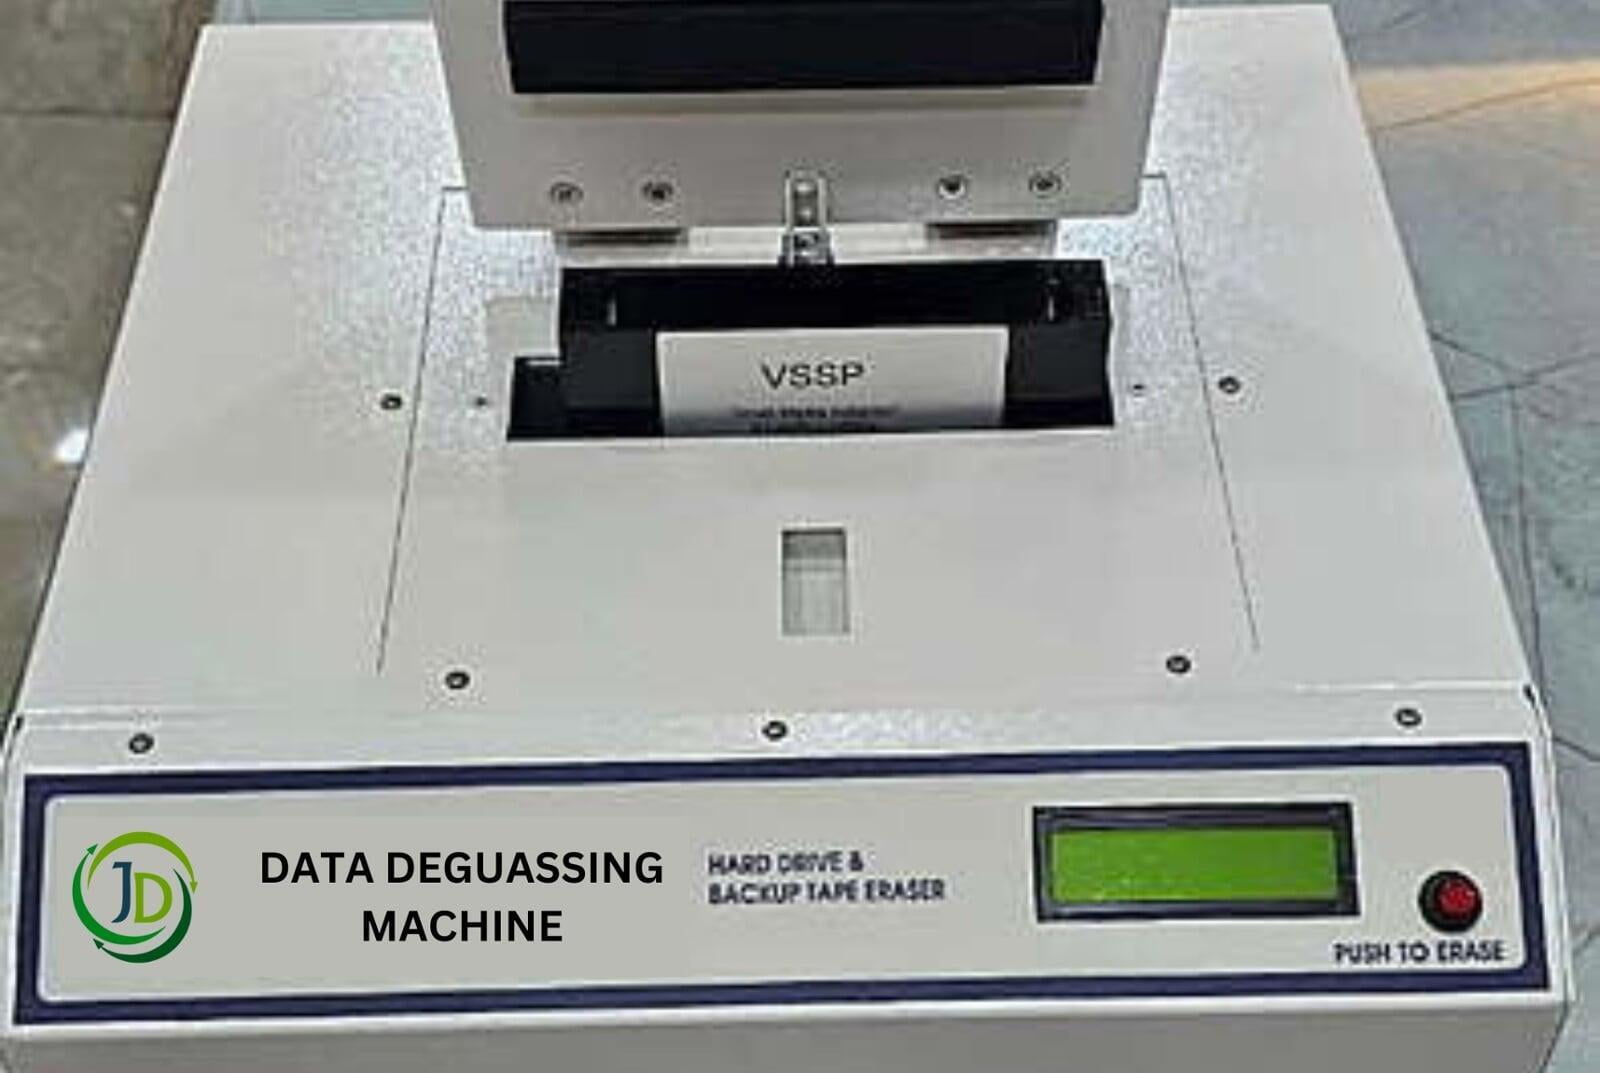 Degaussing machine erasing magnetic media. Secure data destruction with NIST800-88 compliant equipment by Justdispose